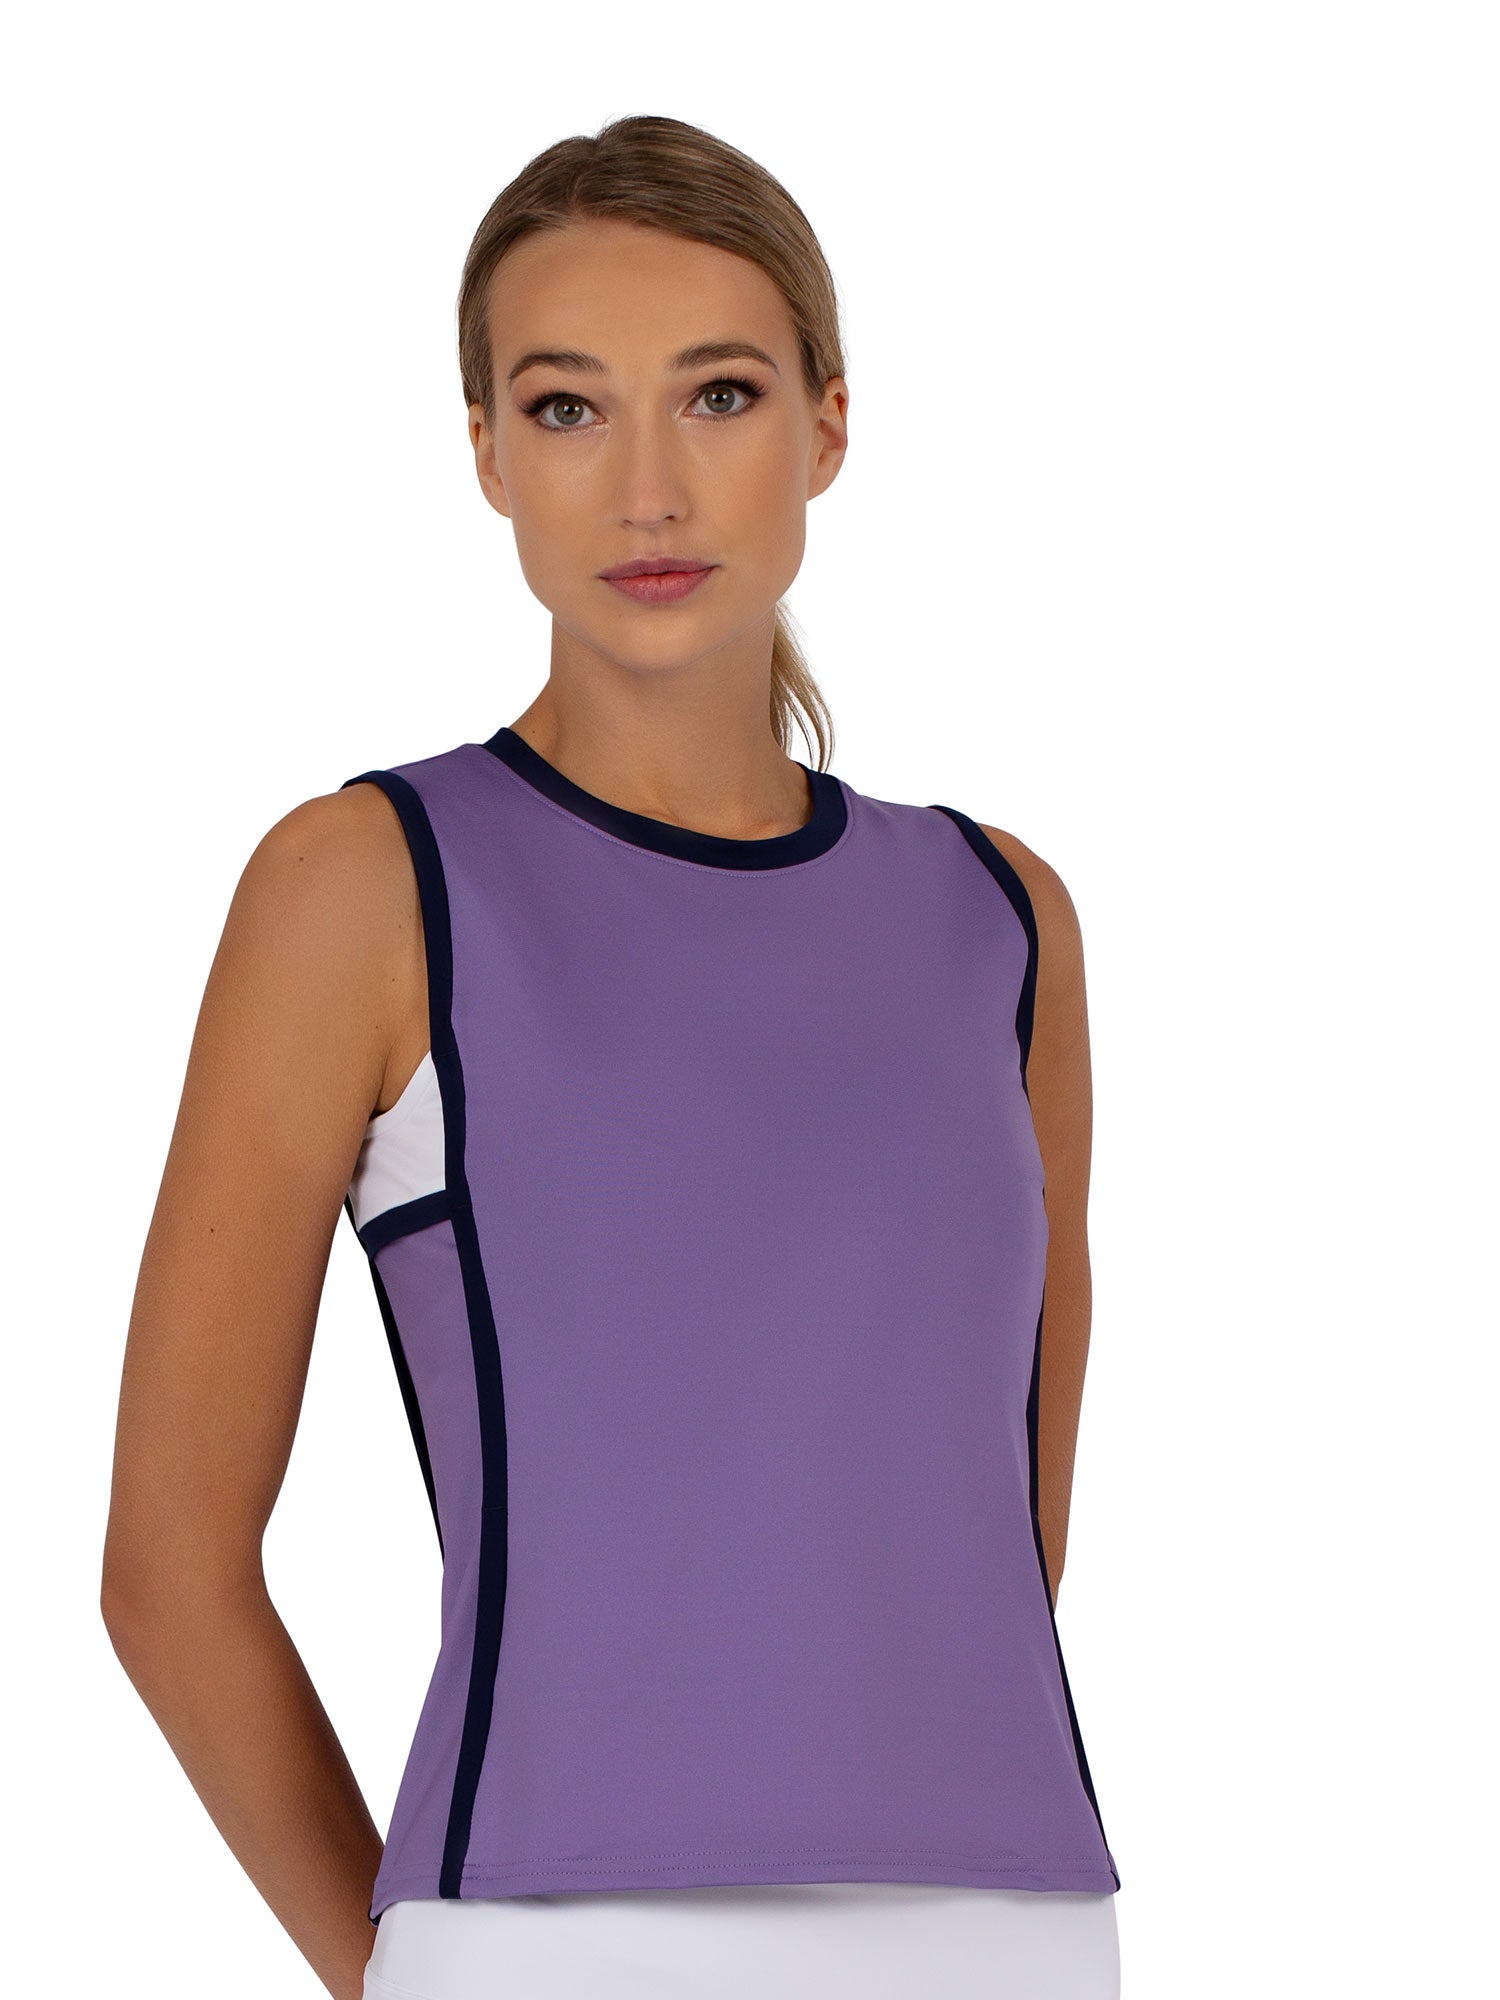 Front view of model wearing the Hazel tennis tank top in lavender and ink by inPhorm NYC